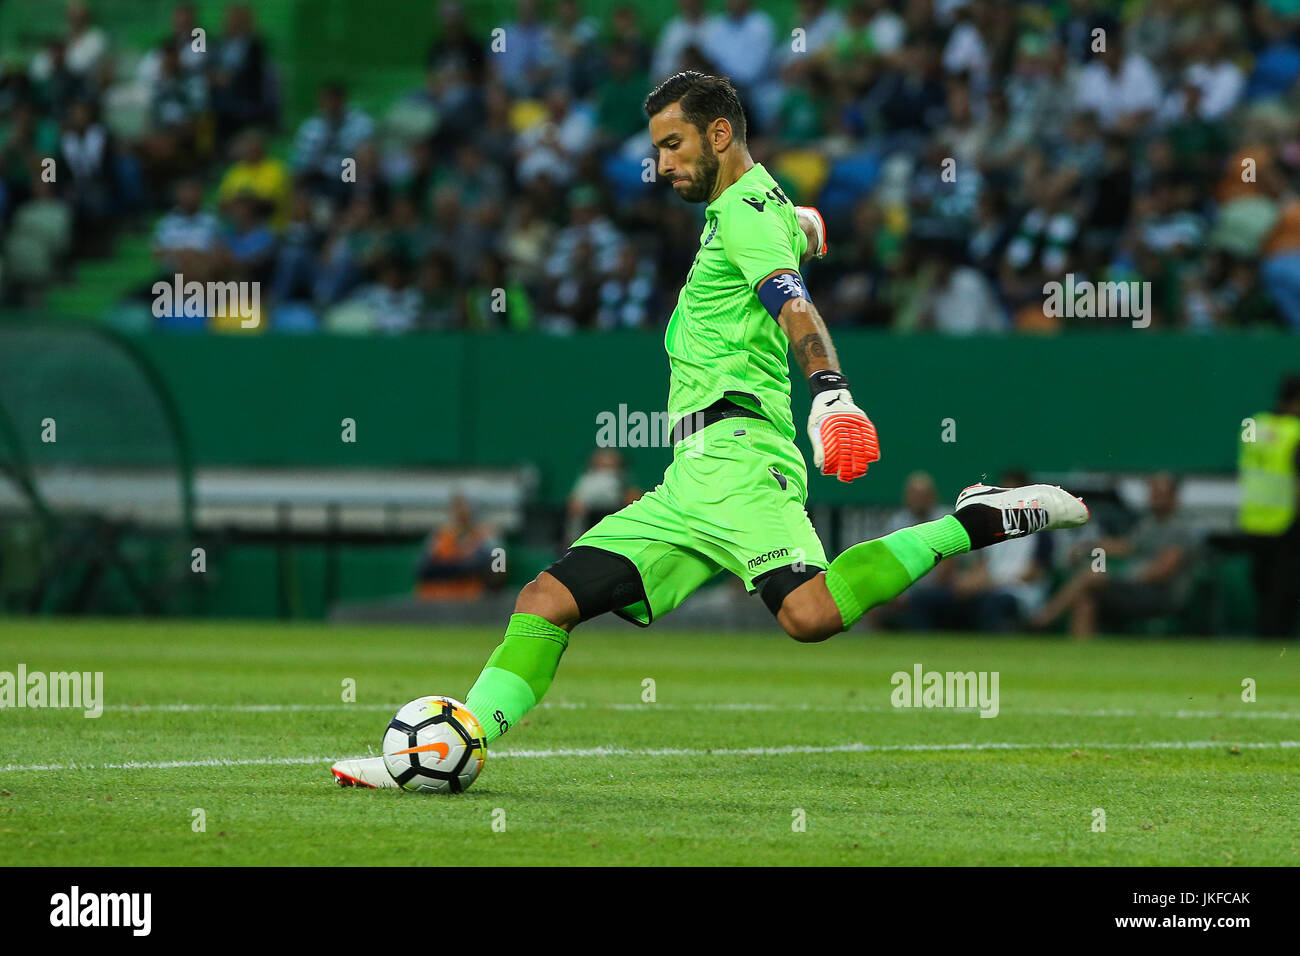 Lisbon, Portugal. 22nd July, 2017. Sporting«s goalkeeper Rui Patricio from Portugal   during the Pre-season Friendly match between Sporting CP and AS Monaco at Estadio Jose Alvalade on July 22, 2017 in Lisbon, Portugal.. Credit: Bruno Barros/Alamy Live News Stock Photo